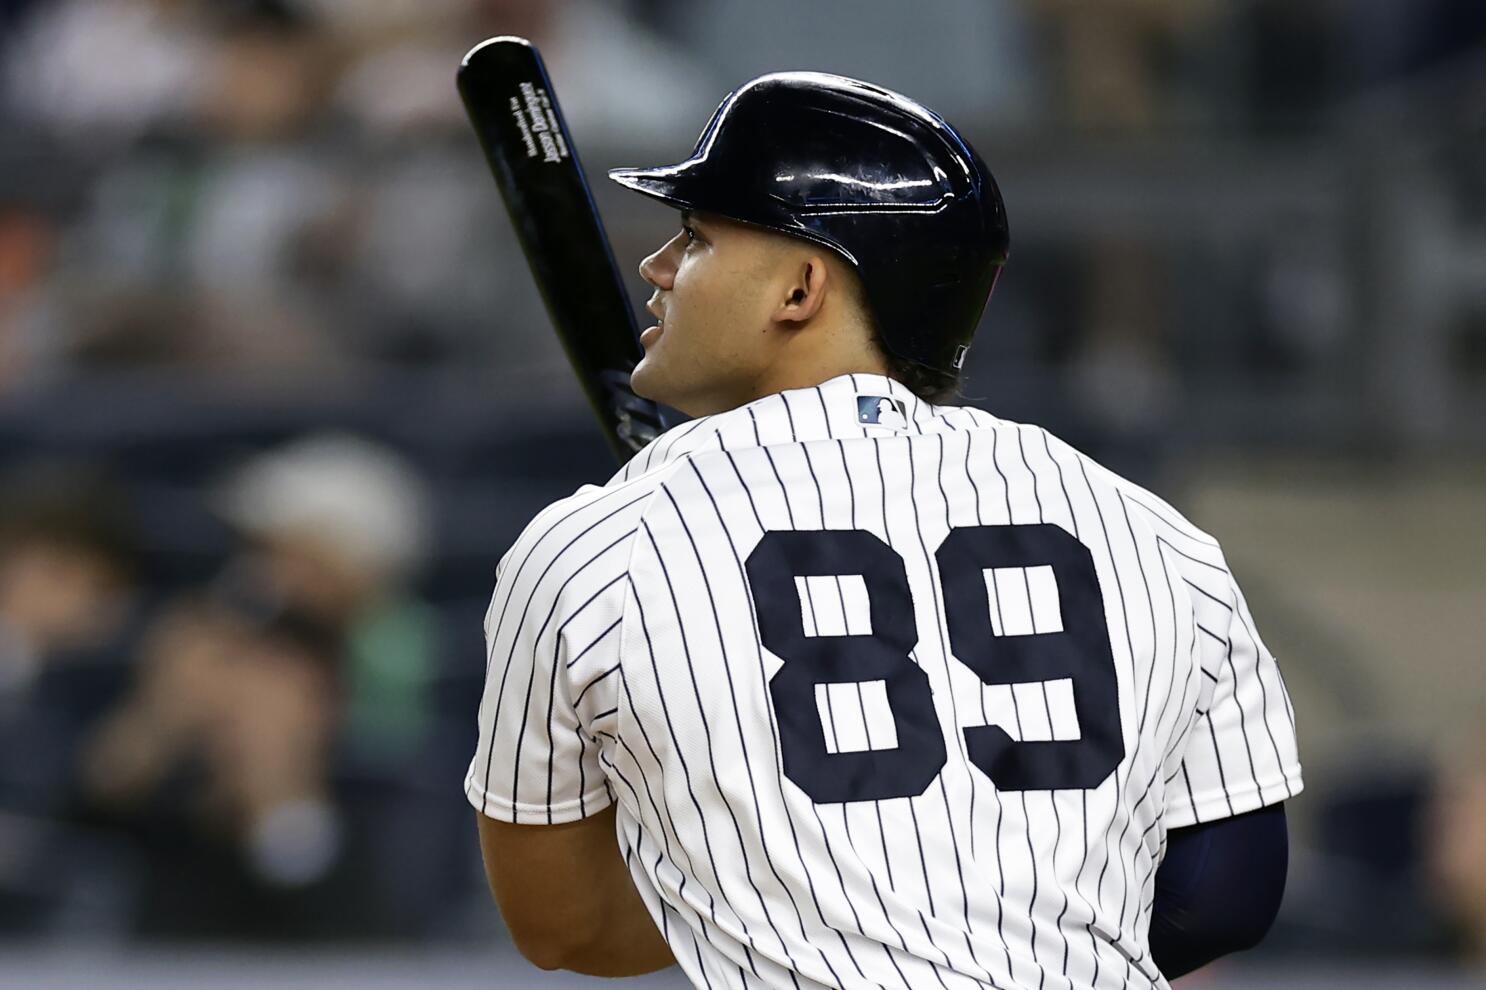 Yankees have golden chance to really take off now